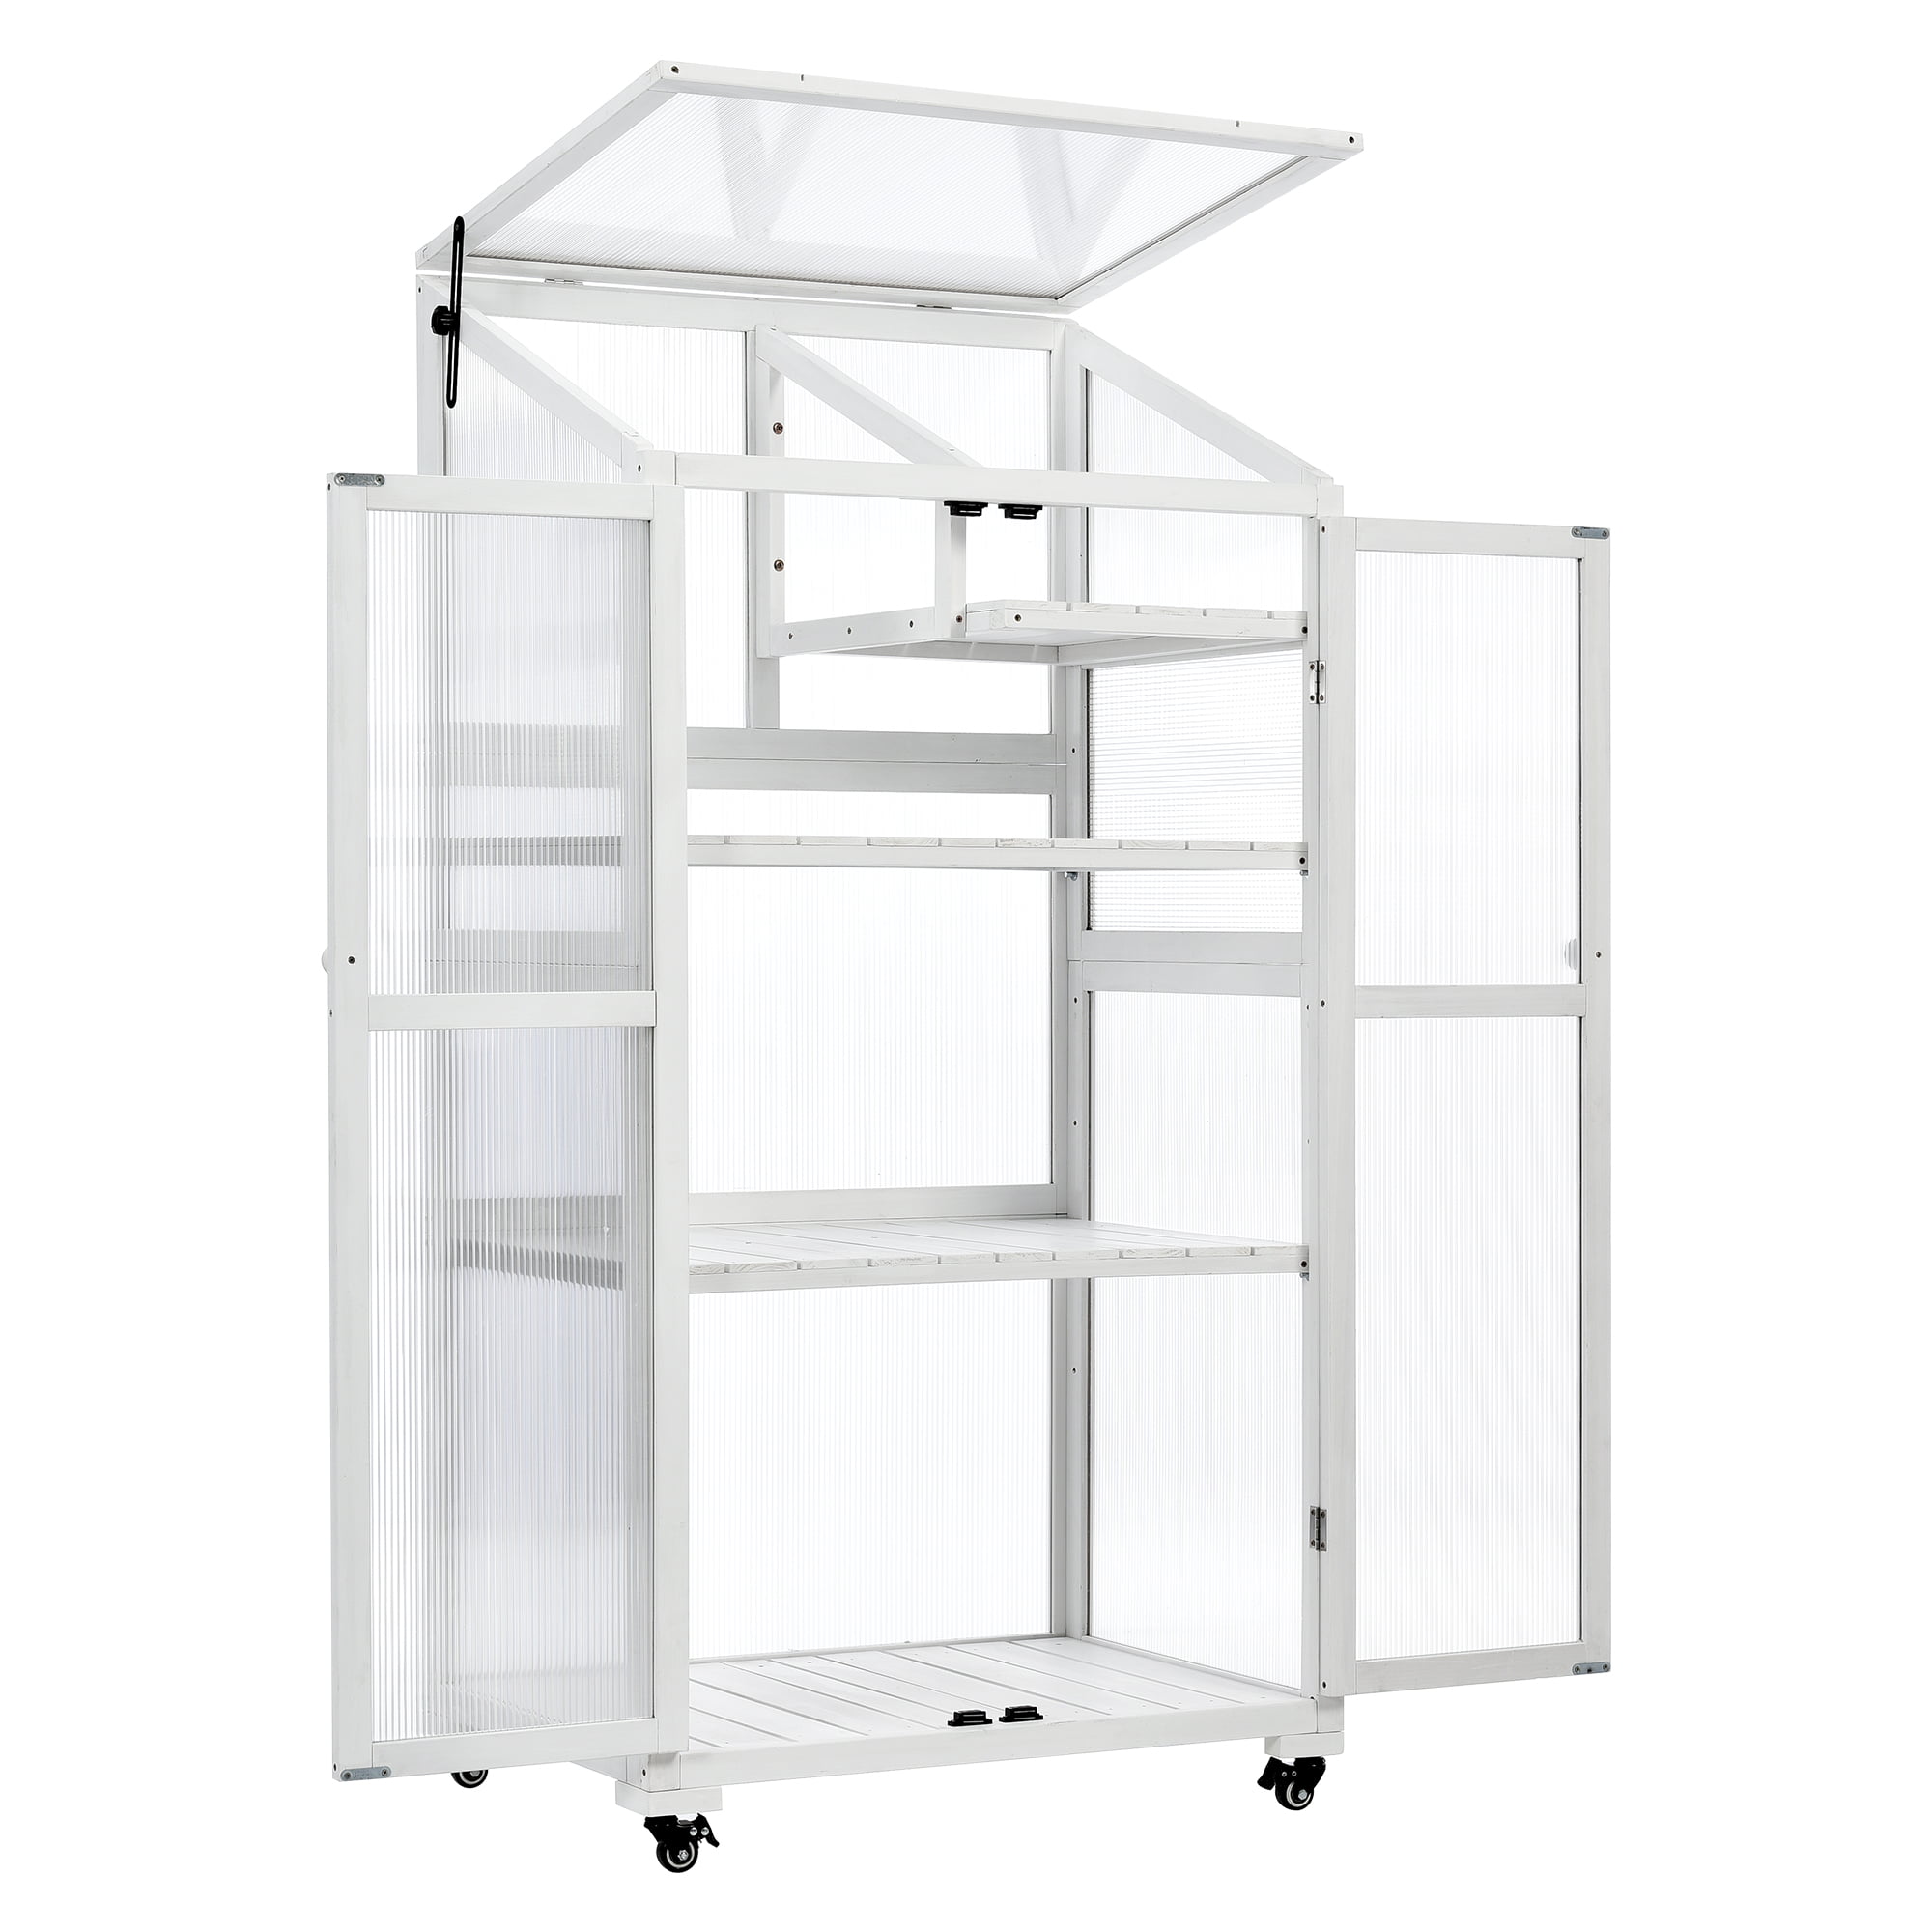 Greenhouses for Outdoors Indoor, 4 Tiers Greenhouse with Wheels and Adjustable Shelves, White Garden Plant Greenhouse Gent, 31.5" W x 22.4" D x 62" H